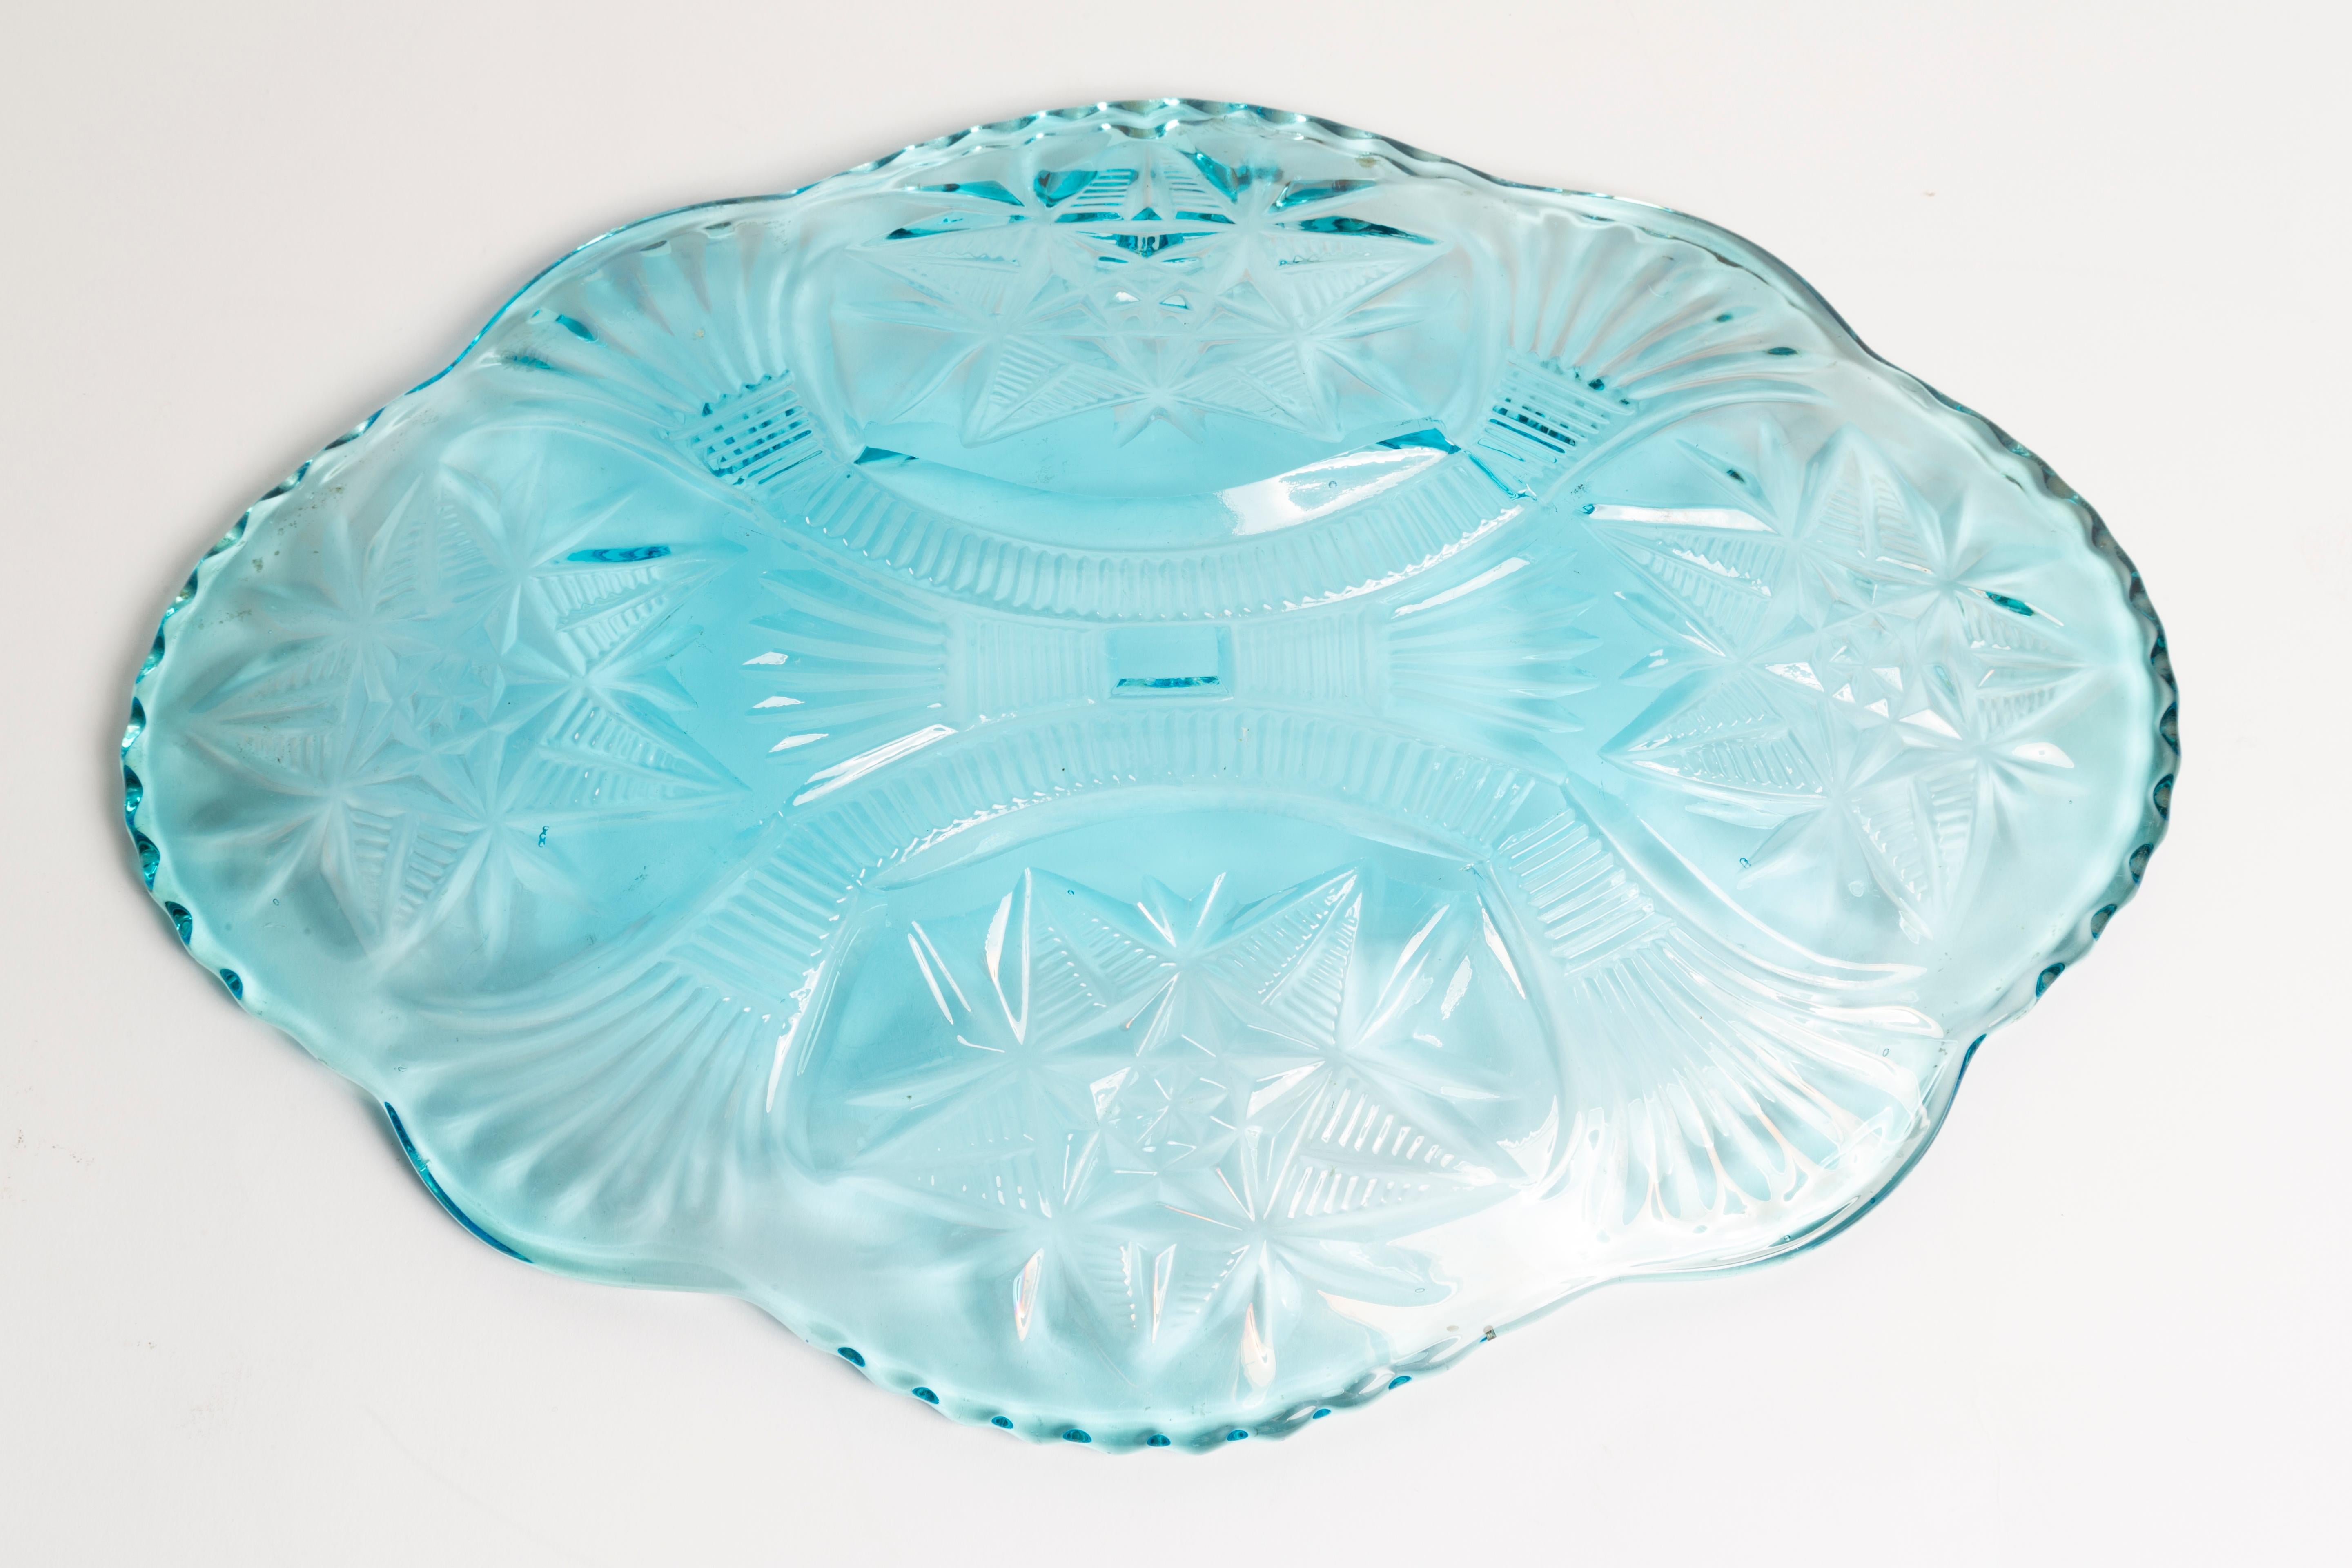 Midcentury Light Blue Decorative Glass Plate, Italy, 1960s For Sale 2